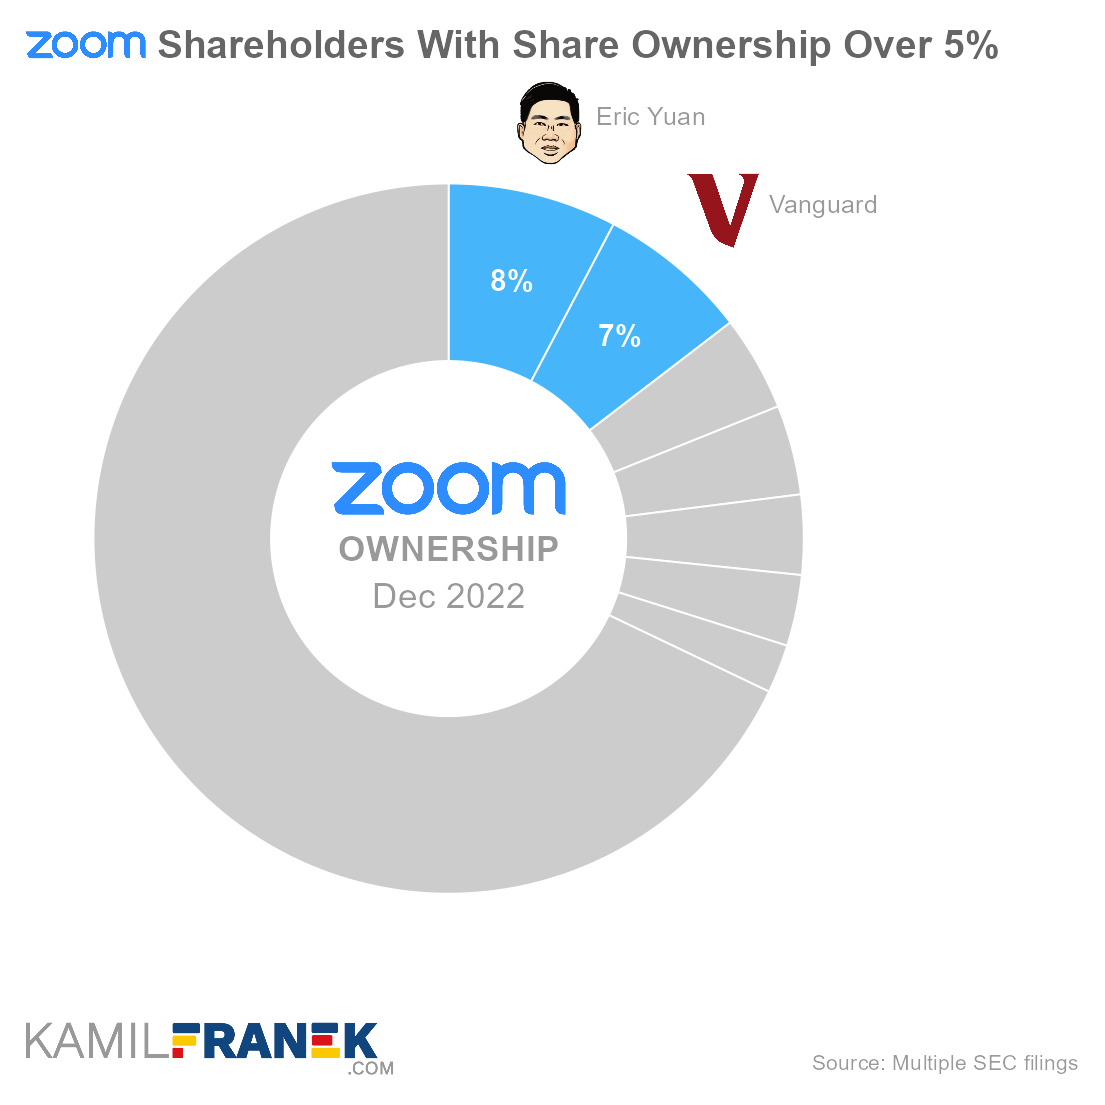 Zoom largest shareholders by share ownership and vote control (donut chart)